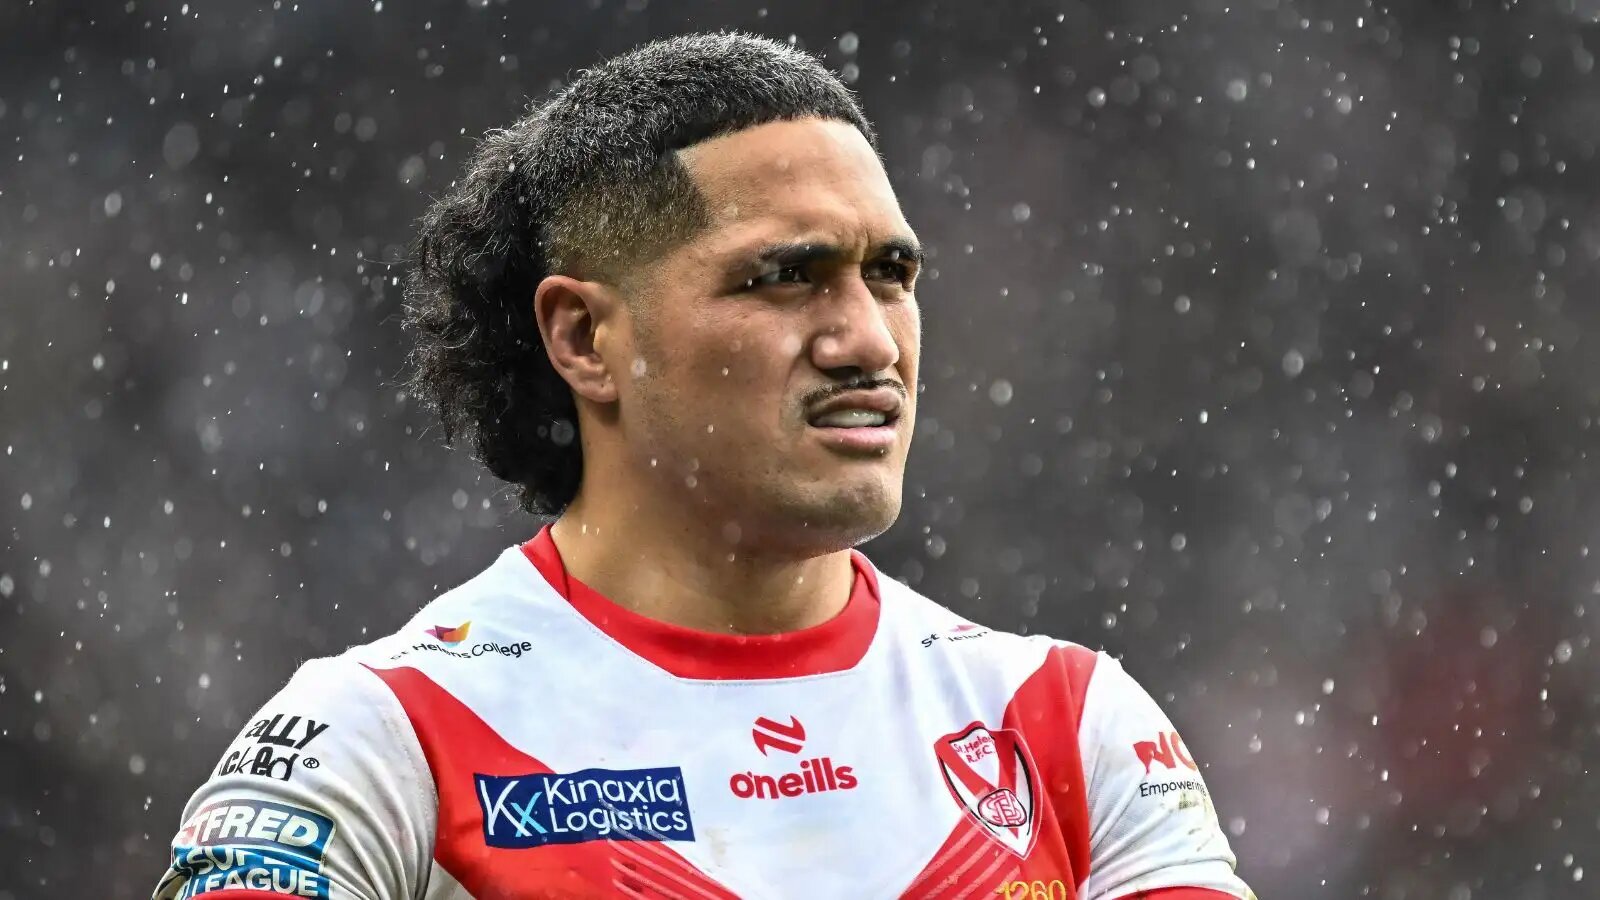 ST Helens key player has been banned for violating the….